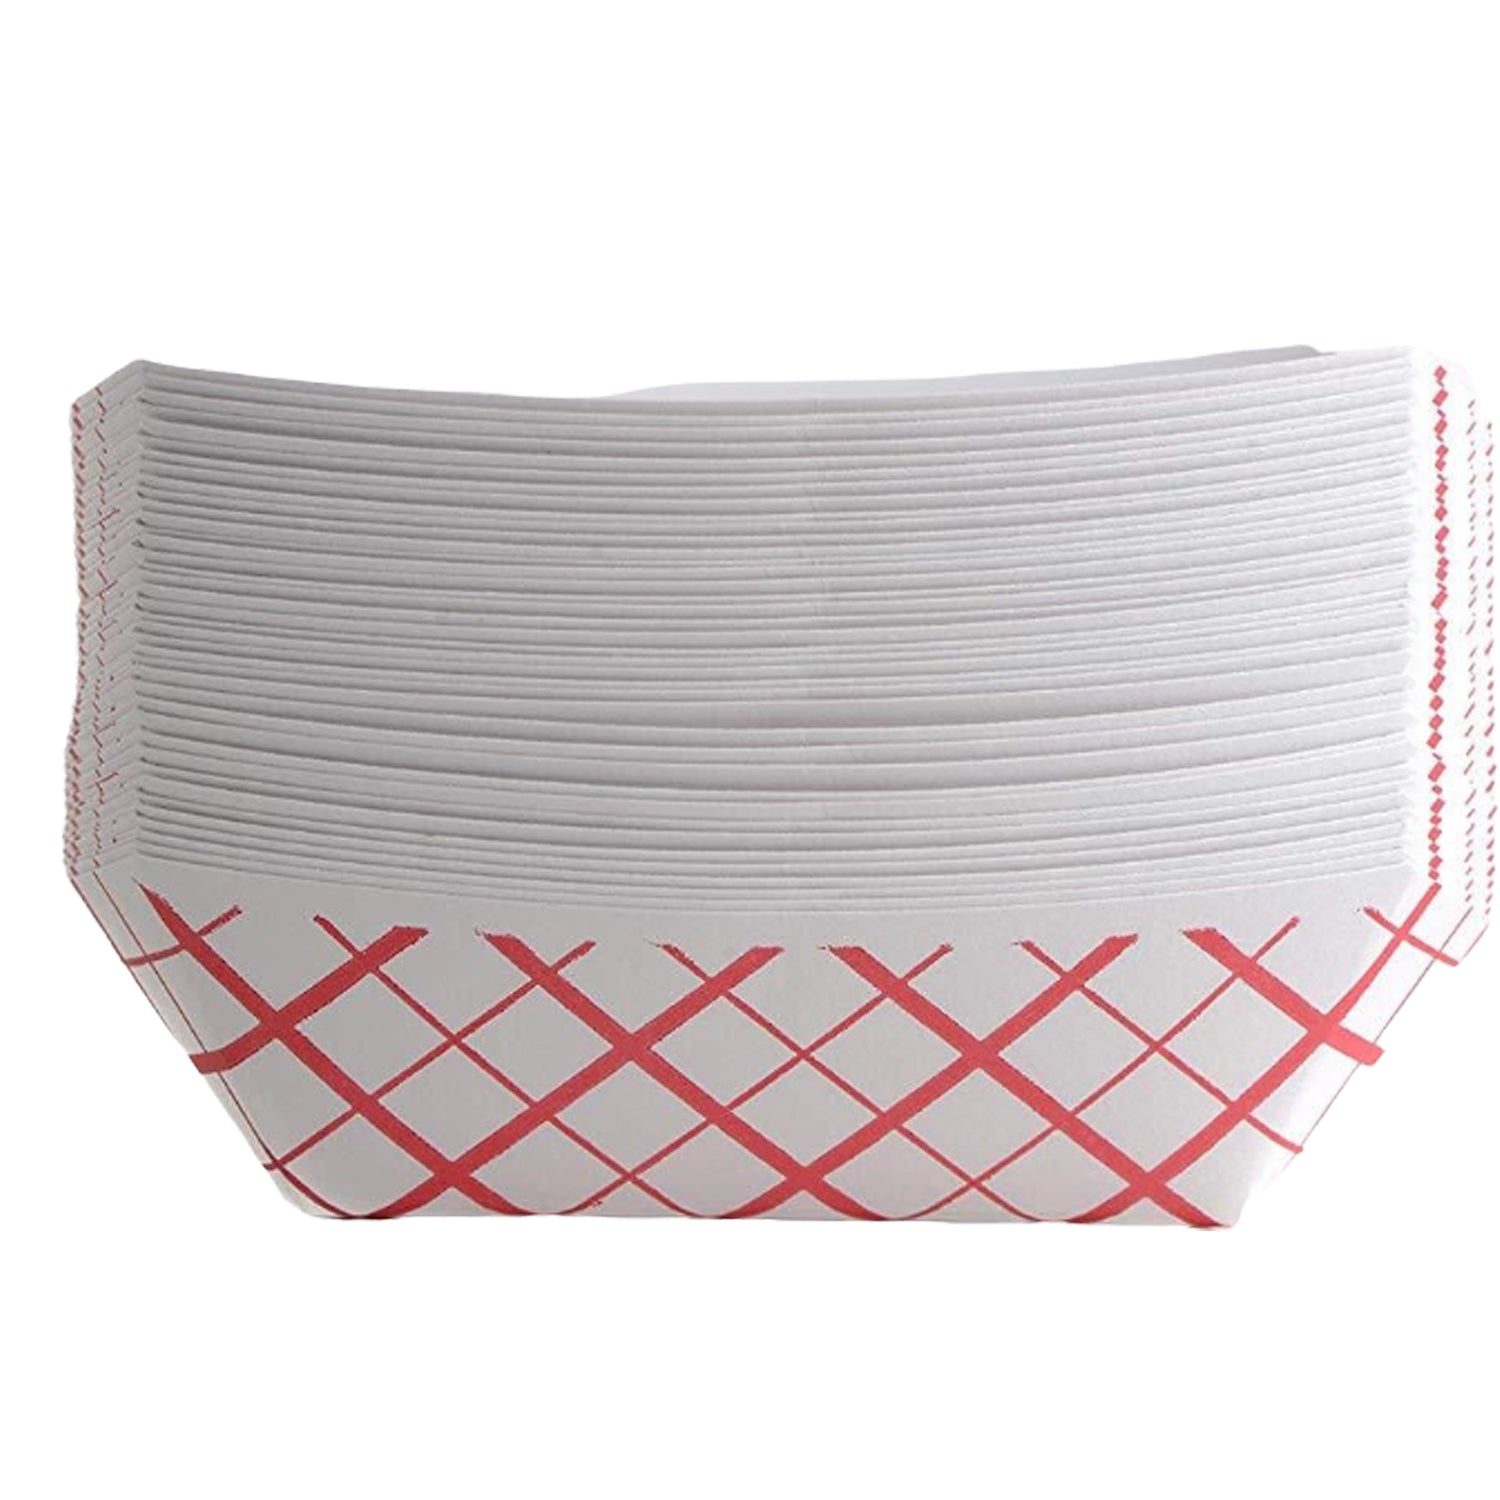 1/4lb Disposable Checkered Paper Food Tray